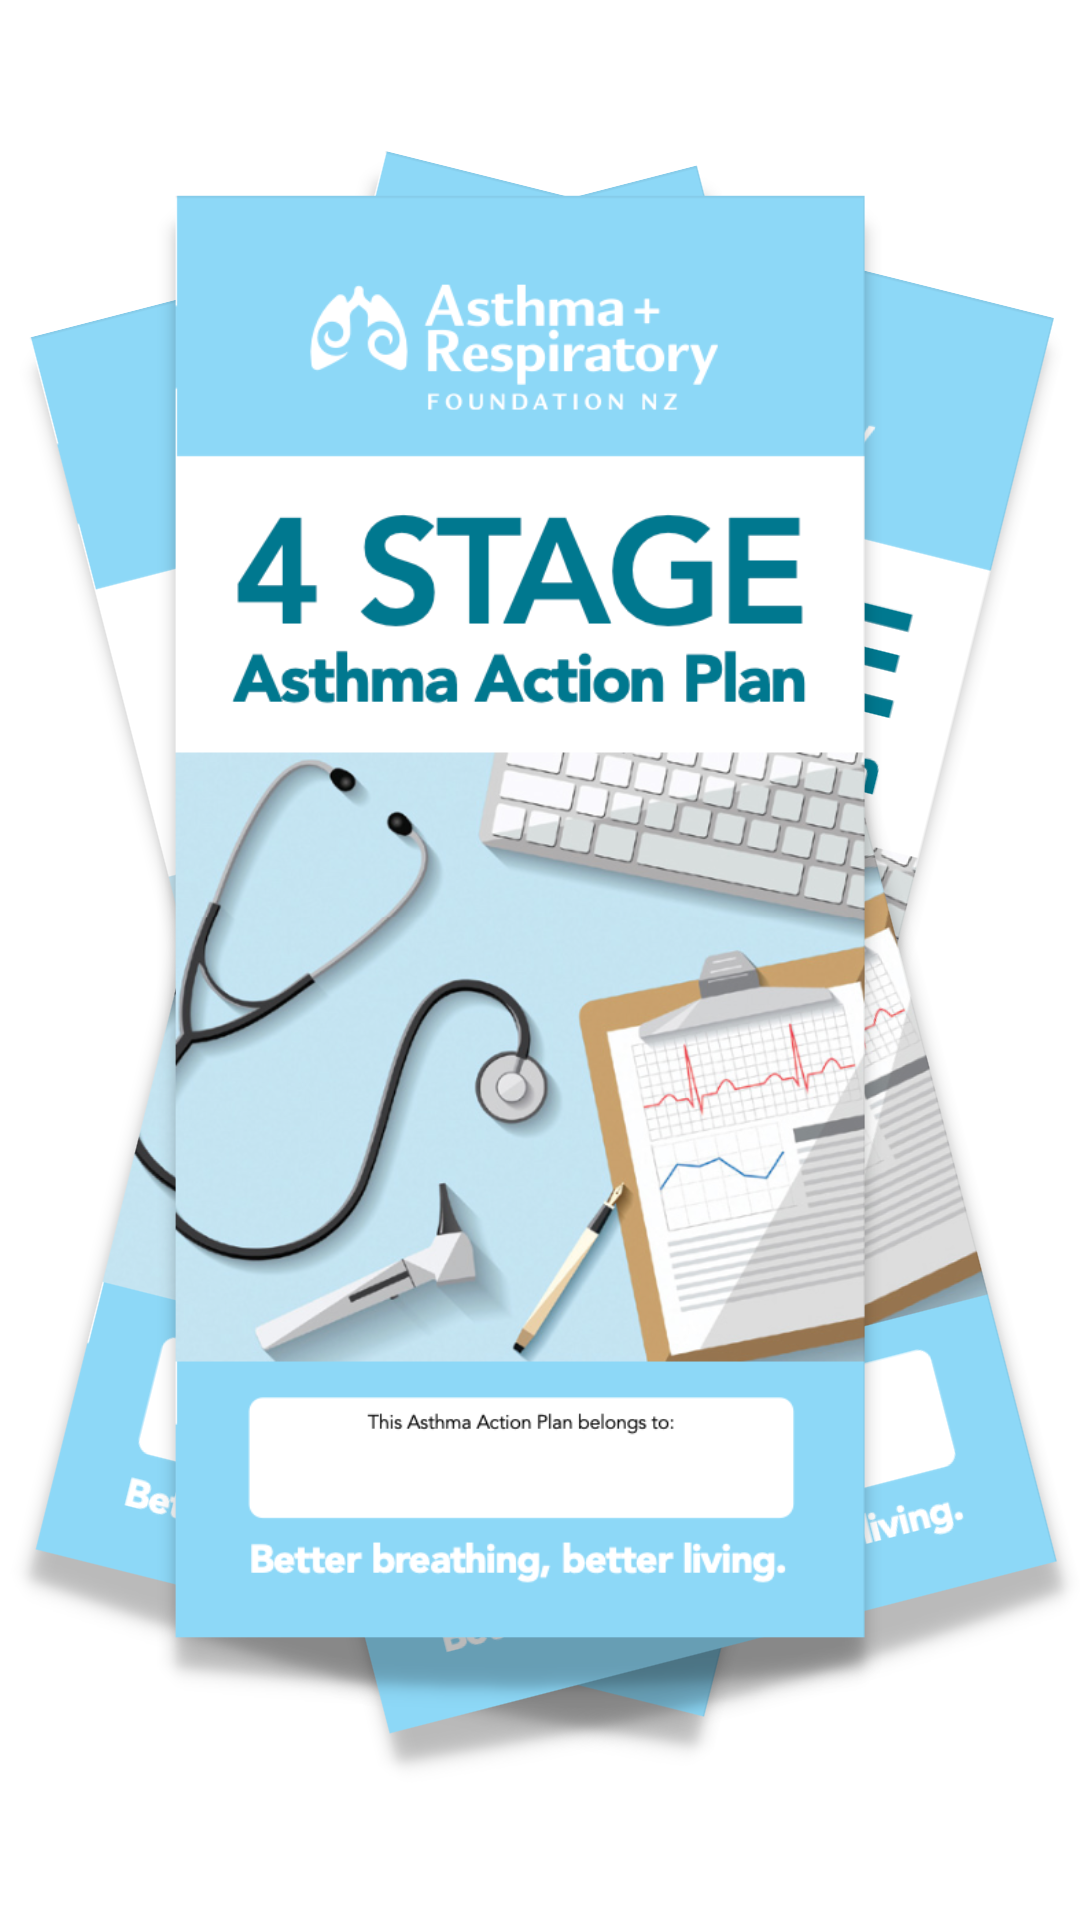 4 Stage Asthma Action Plan